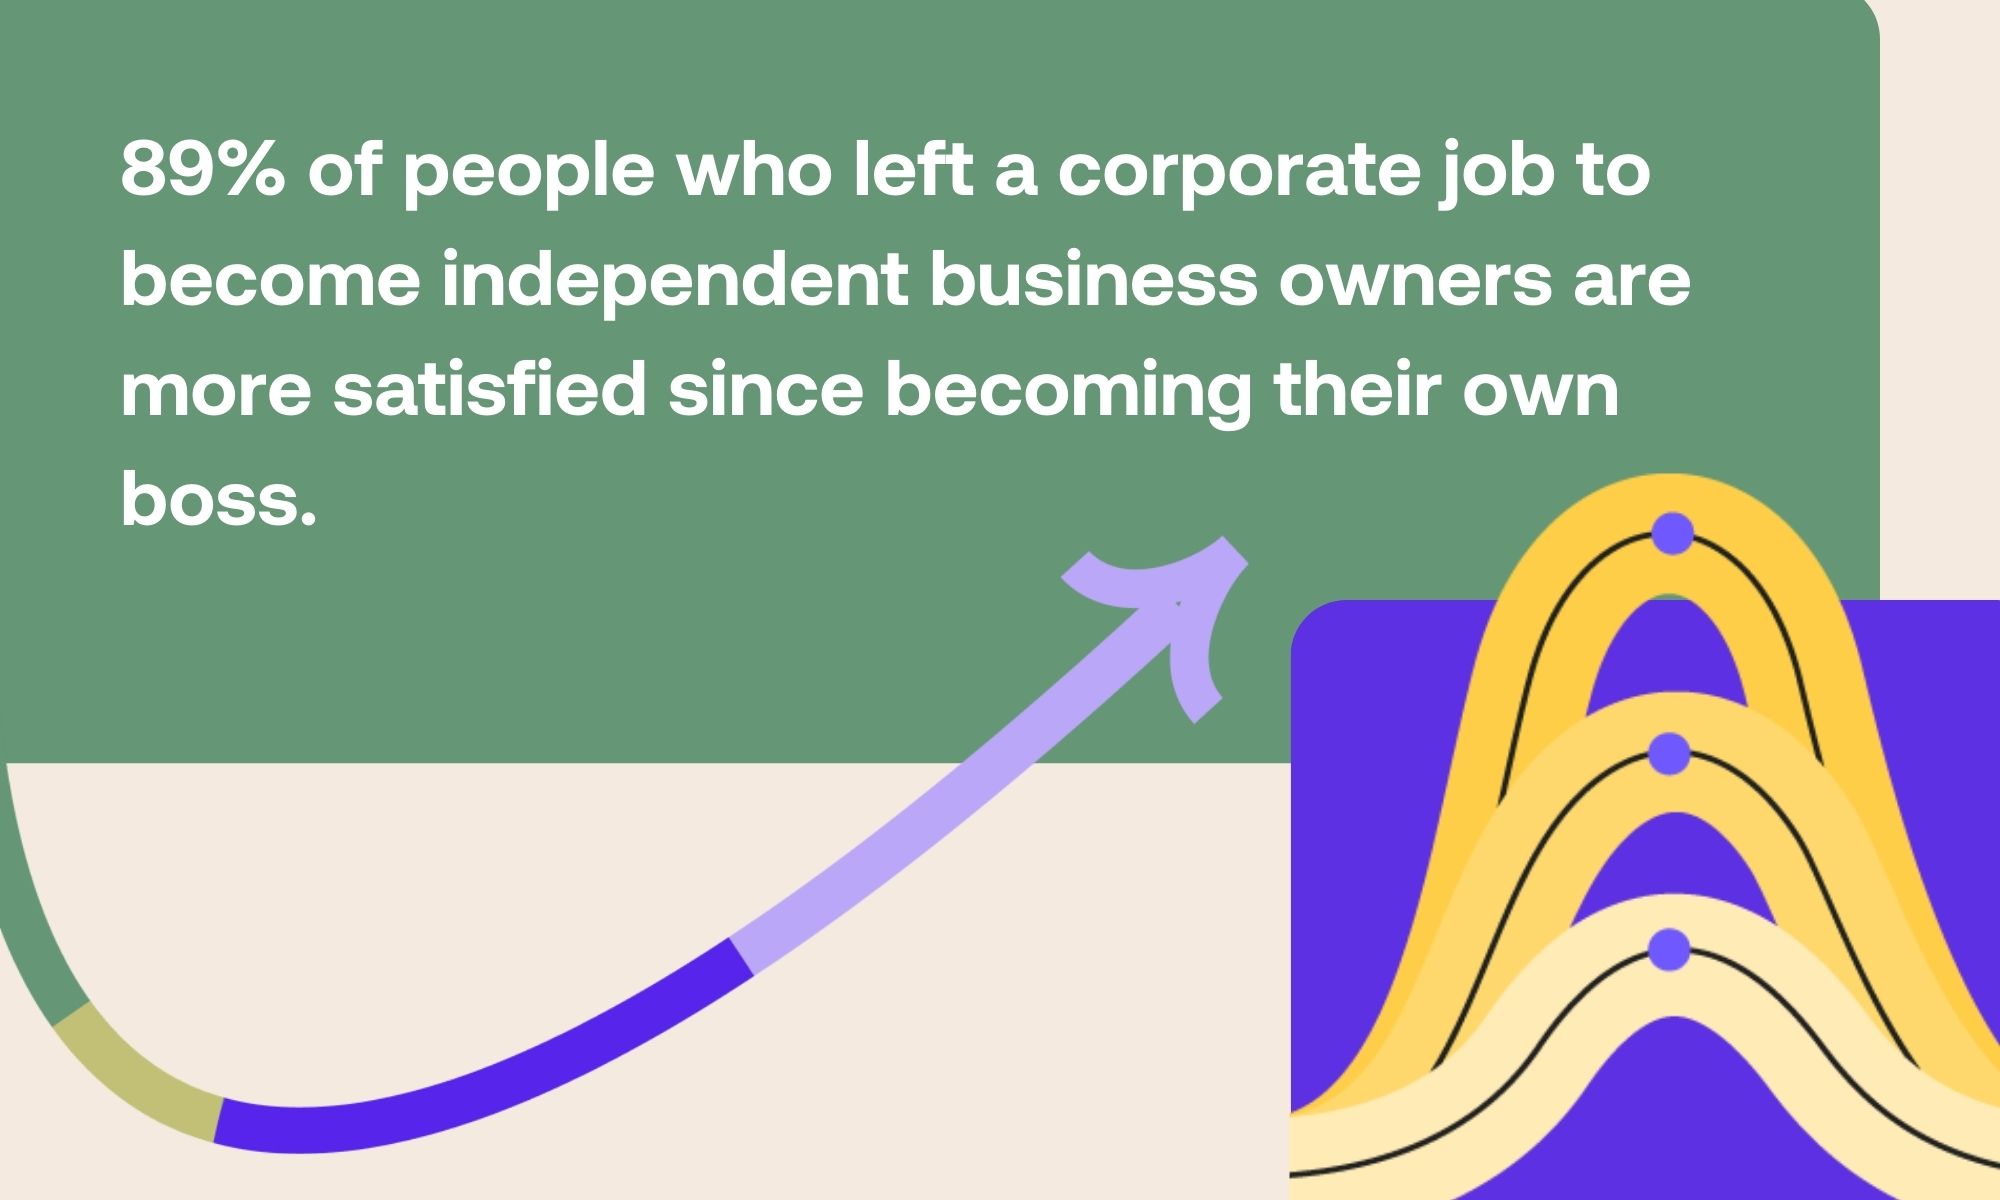 89% of people who left a corporate job to become independent business owners are more satisfied since becoming their own boss.